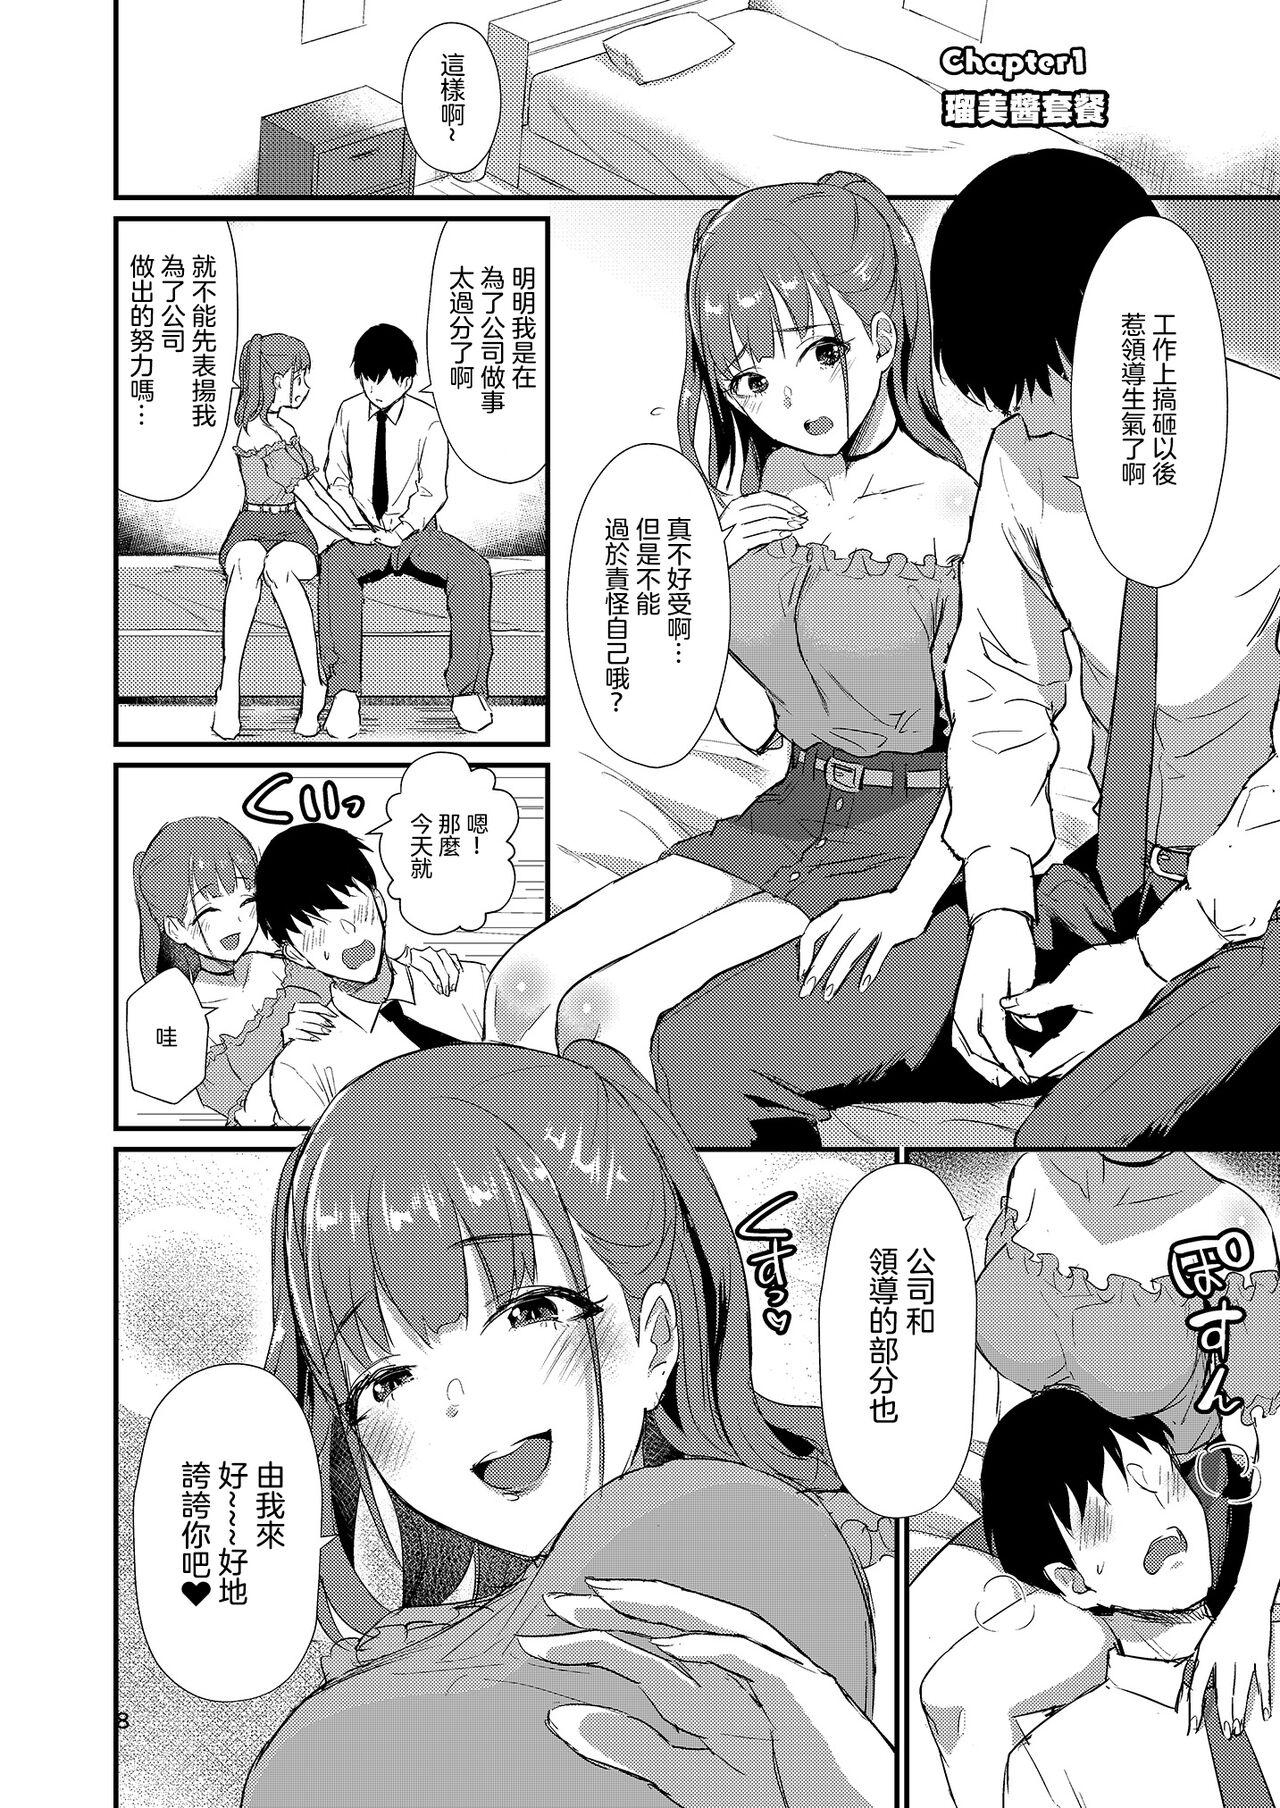 Classy Homehome Home e Youkoso! - Welcome to Home Home Home! | 歡迎來到誇誇屋！ Venezuela - Page 9